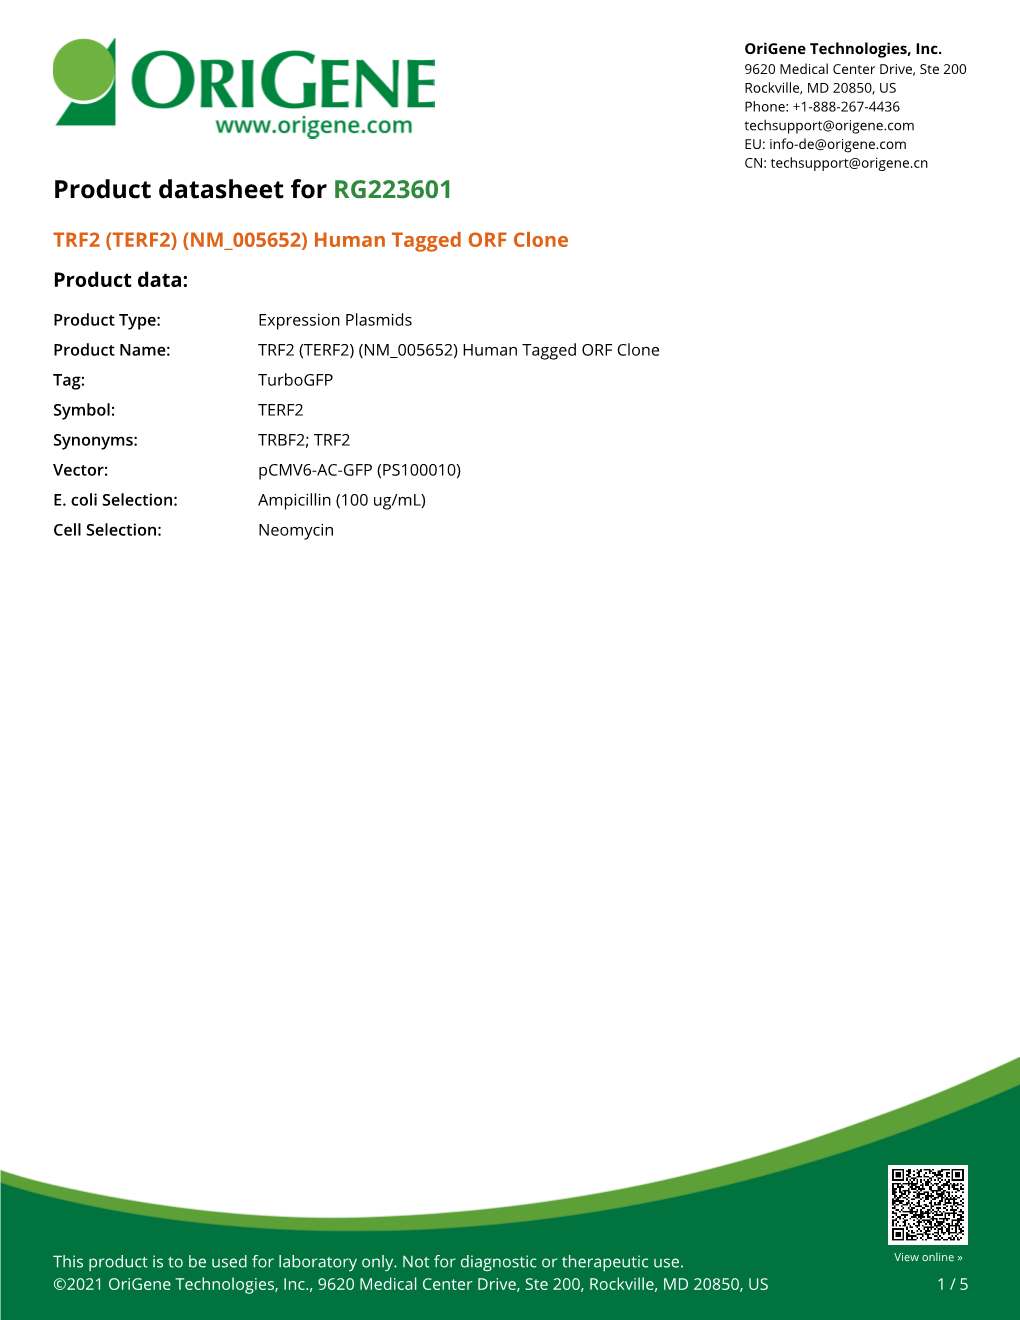 TRF2 (TERF2) (NM 005652) Human Tagged ORF Clone Product Data